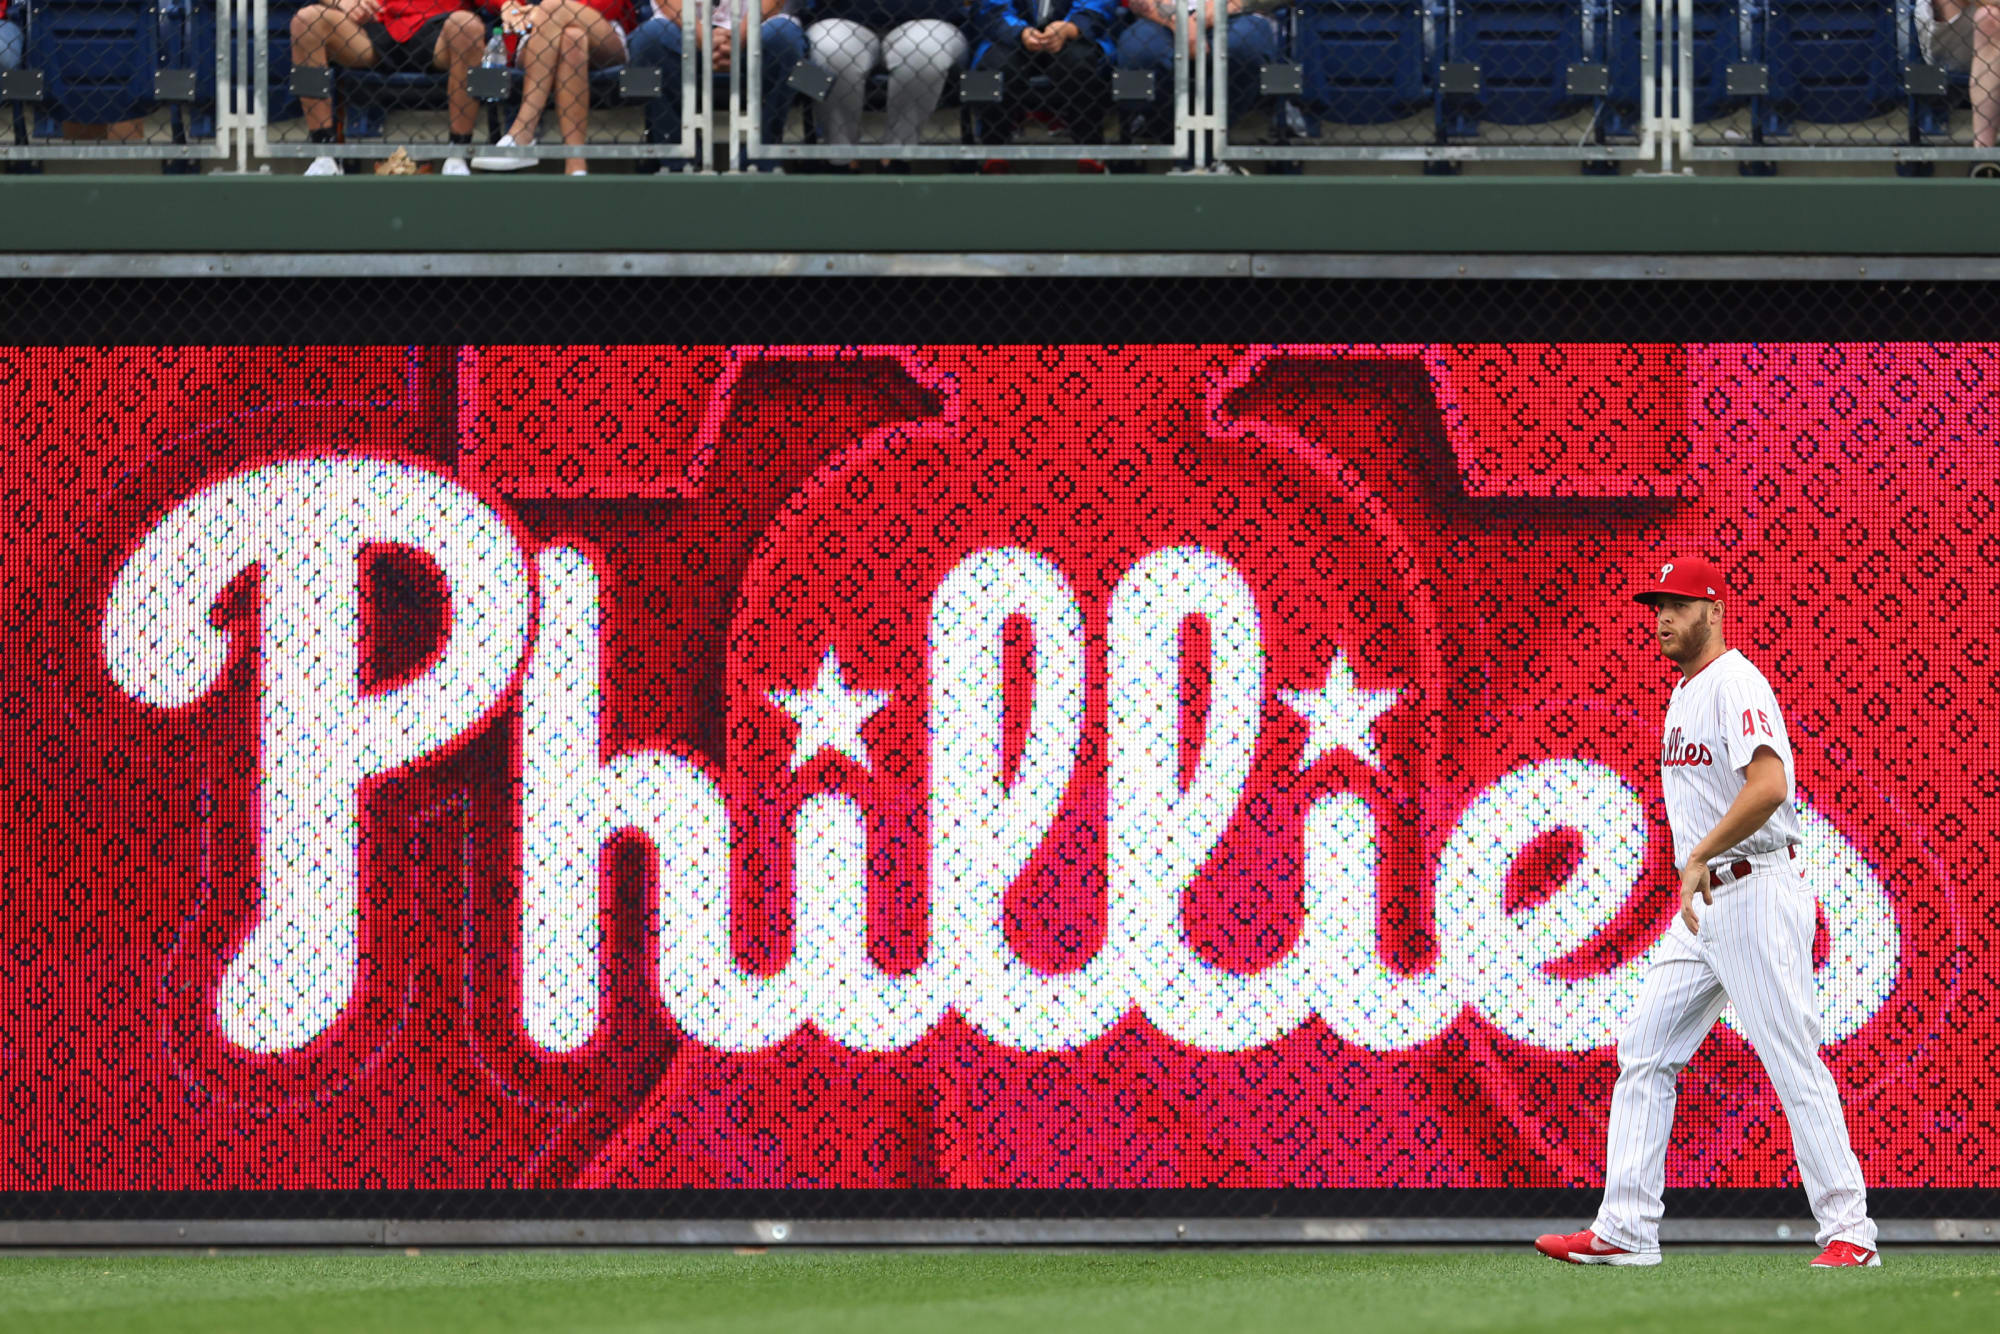 Attempting to answer 15 key roster questions about the 2022 Phillies